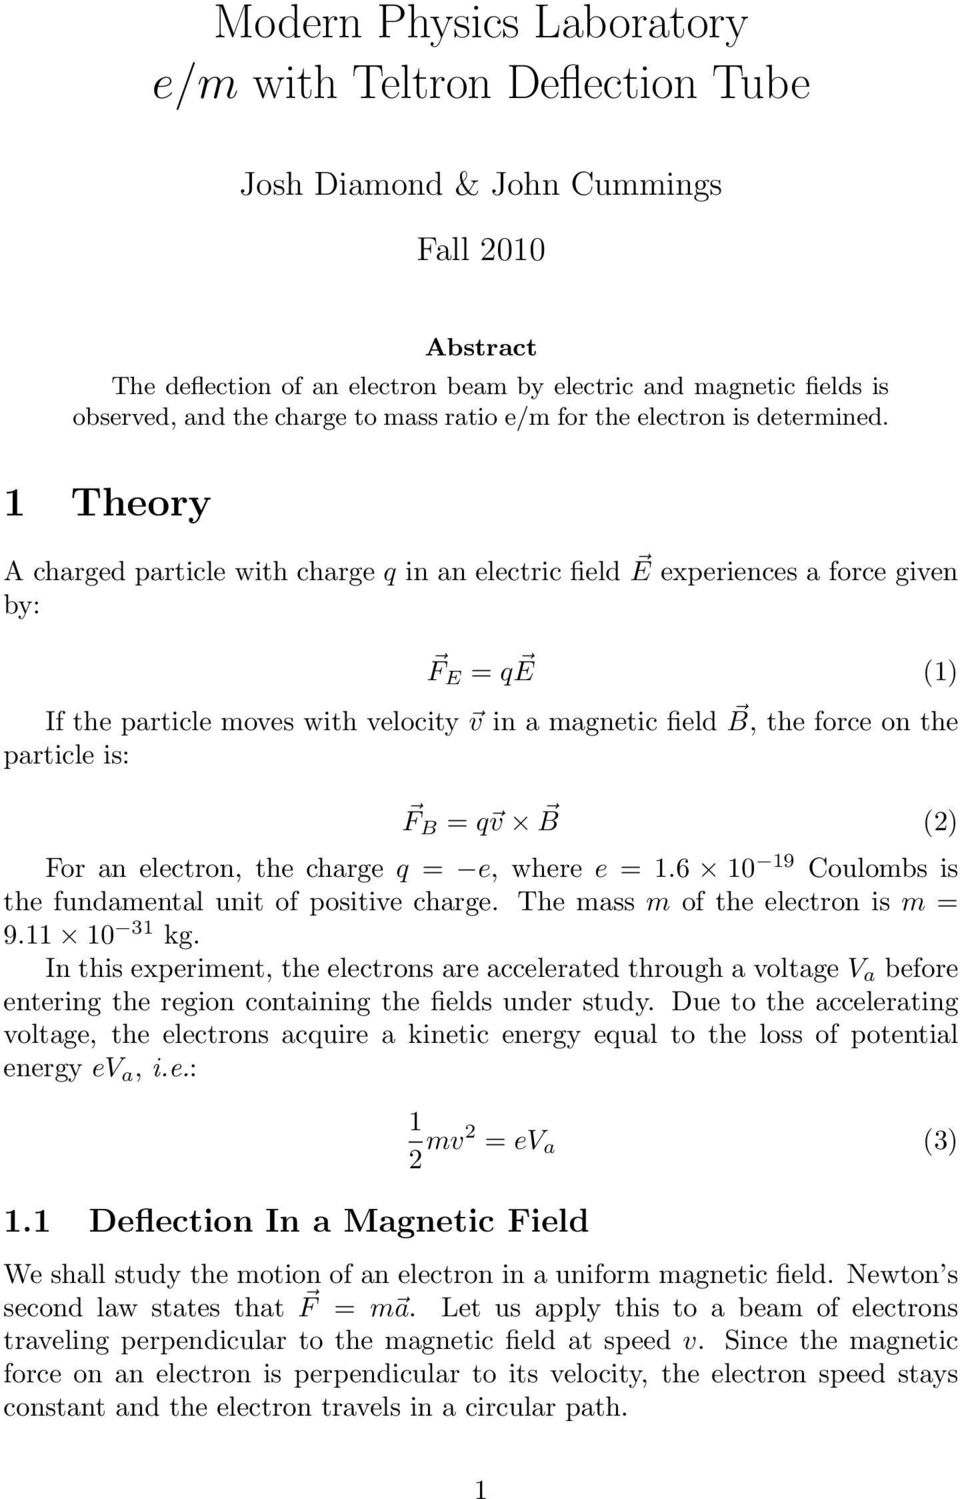 1 Theory A charged particle with charge q in an electric field E experiences a force given by: F E = q E (1) If the particle moves with velocity v in a magnetic field B, the force on the particle is: